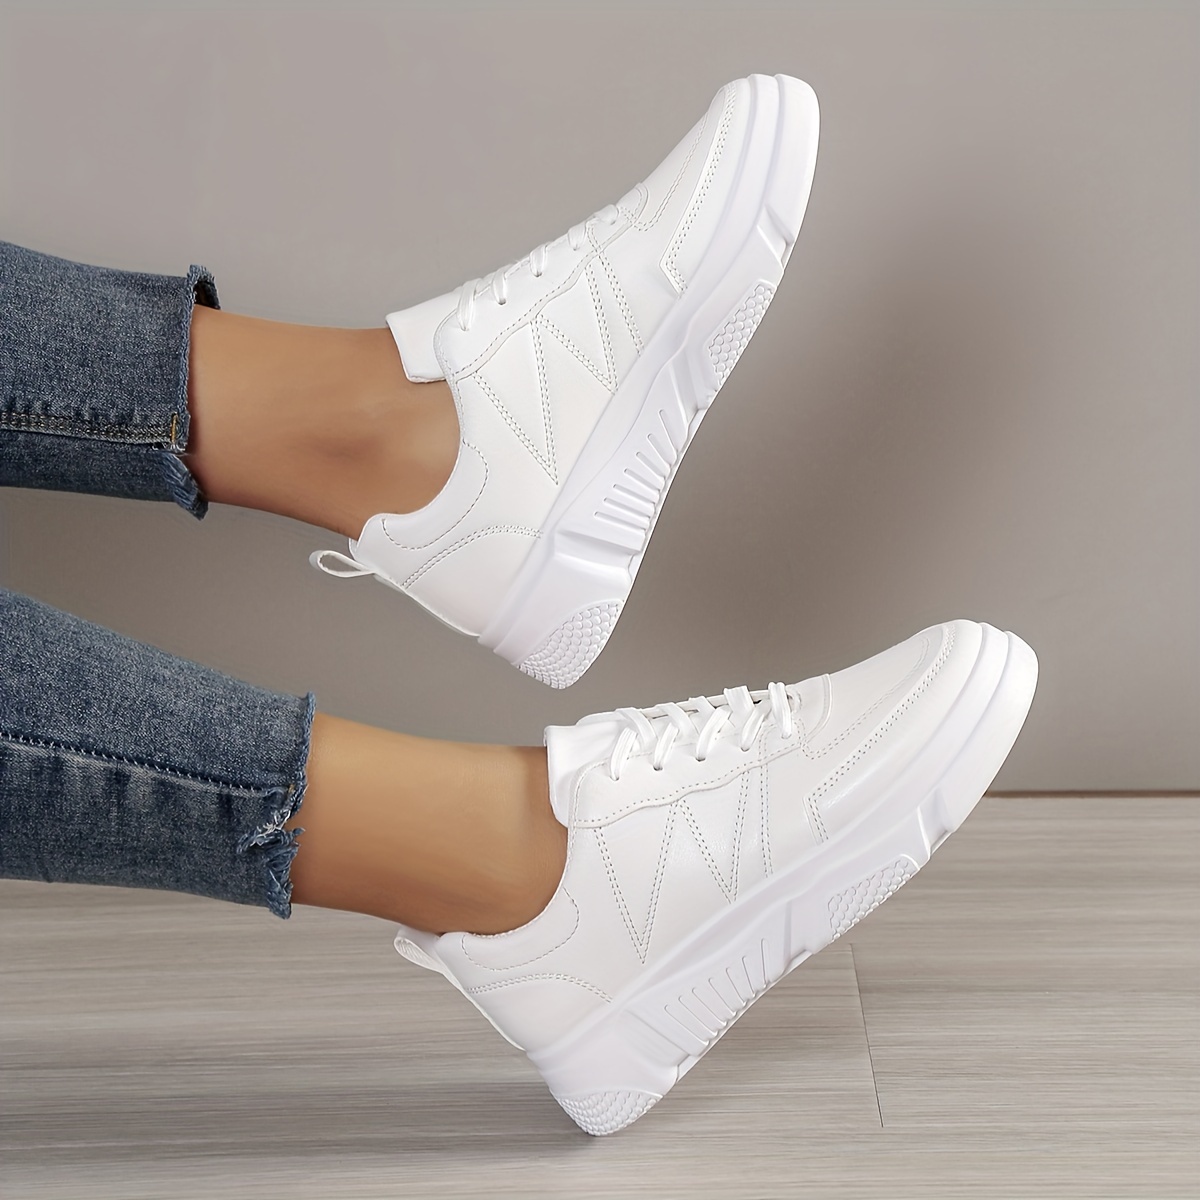 

Women's White Skate Shoes, All-match Lace Up Low Top Flatform Sneakers, Casual Outdoor Sports Shoes